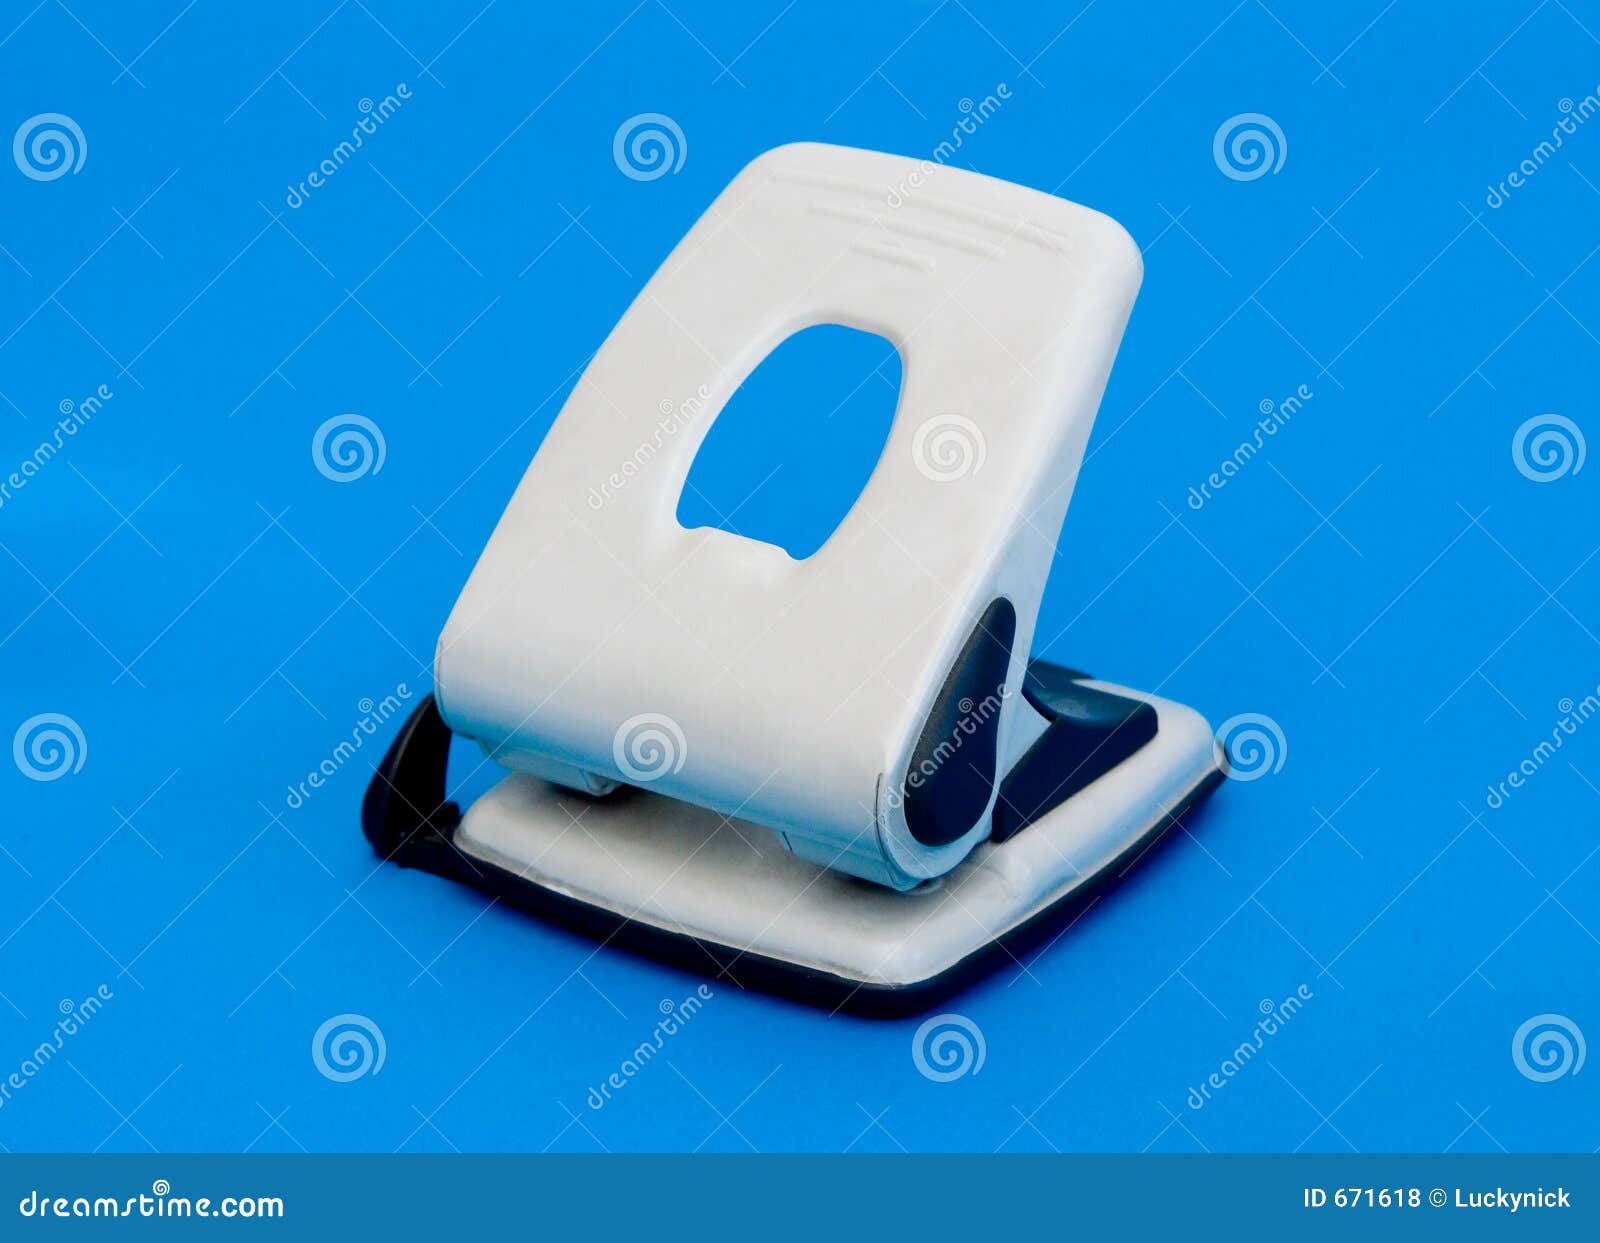 small hole puncher on blue